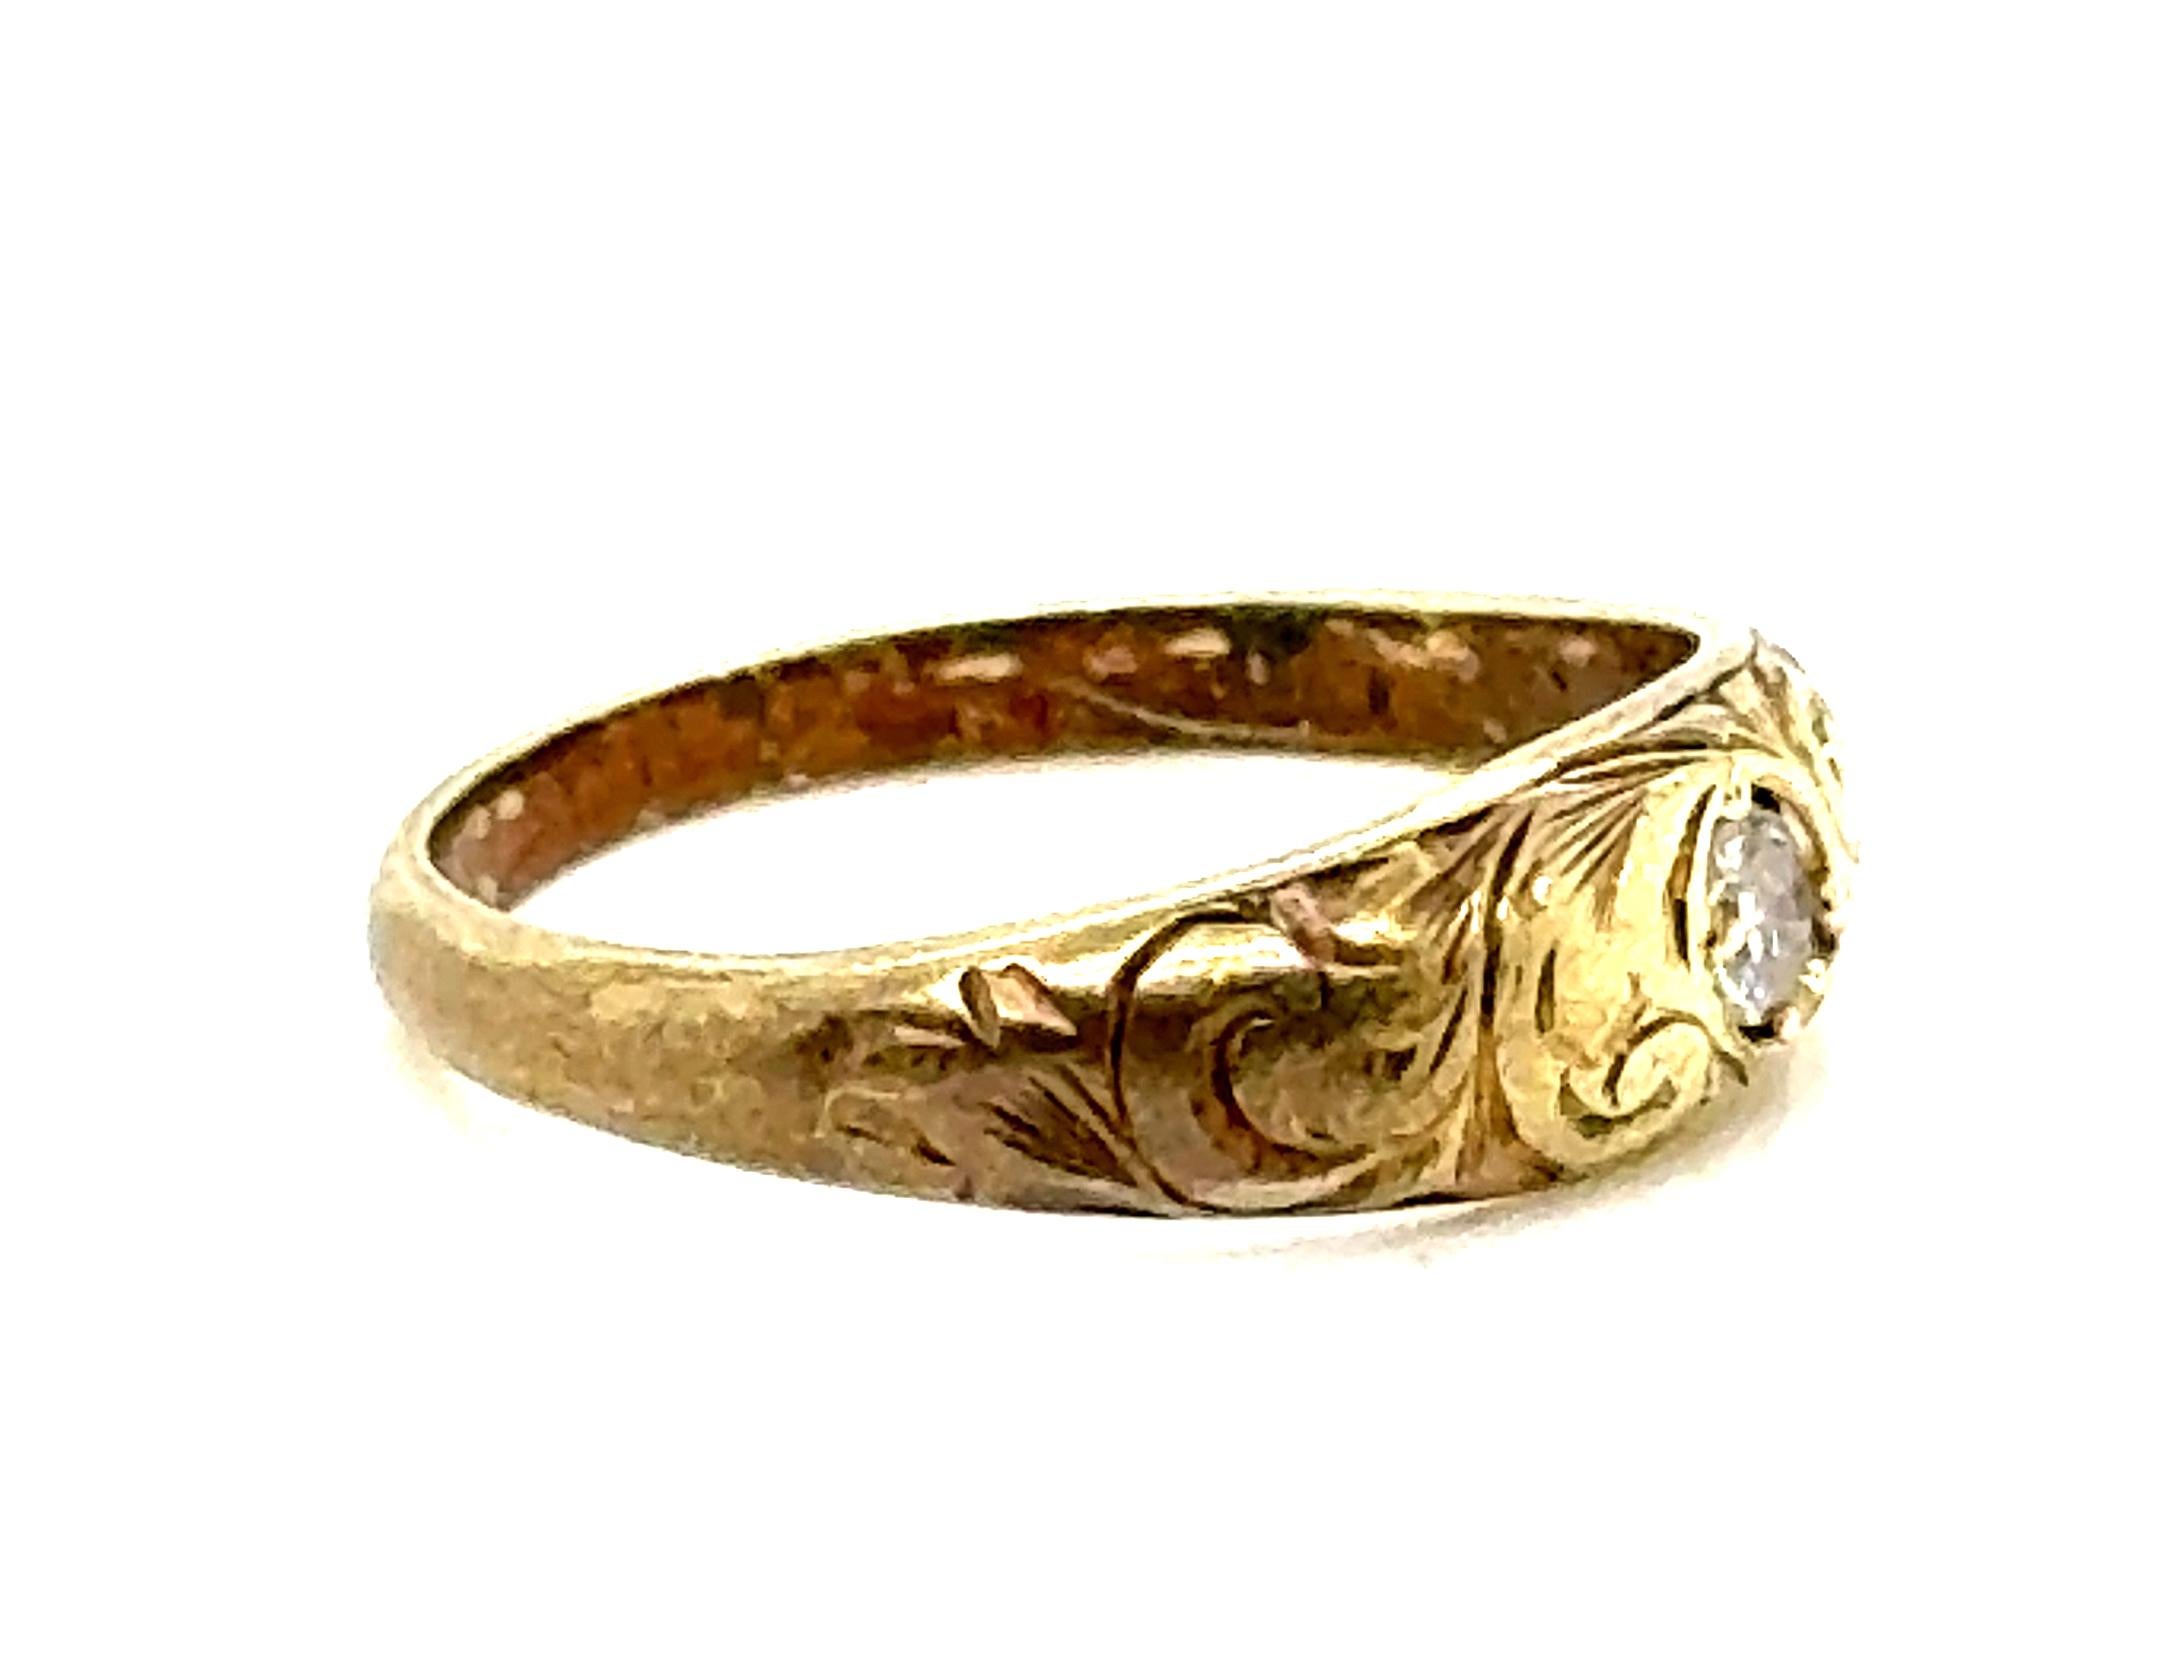 Genuine Original Antique from the 1890's Victorian Diamond Baby Ring 14K Yellow Gold  Allsopp Bros


Features a Genuine .04ct Natural Antique Single Cut Diamond

Trademarked Allsopp Bros

Gorgeous Patina Proves It's Age

14K Yellow Gold

Circa